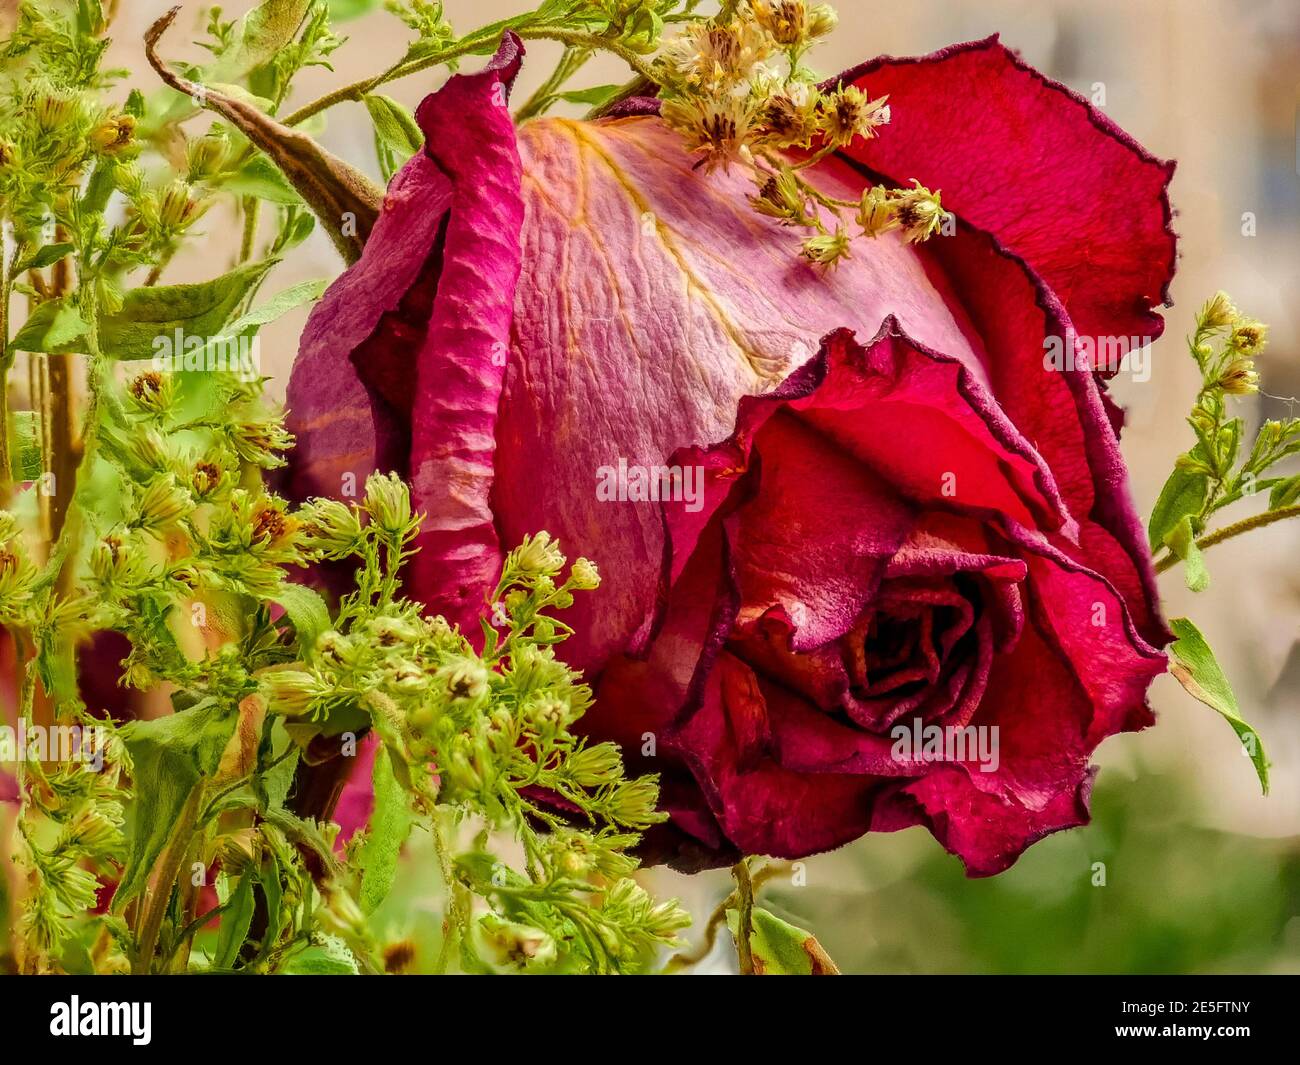 Dried Roses stock photo. Image of decor, crafts, aging - 17498720